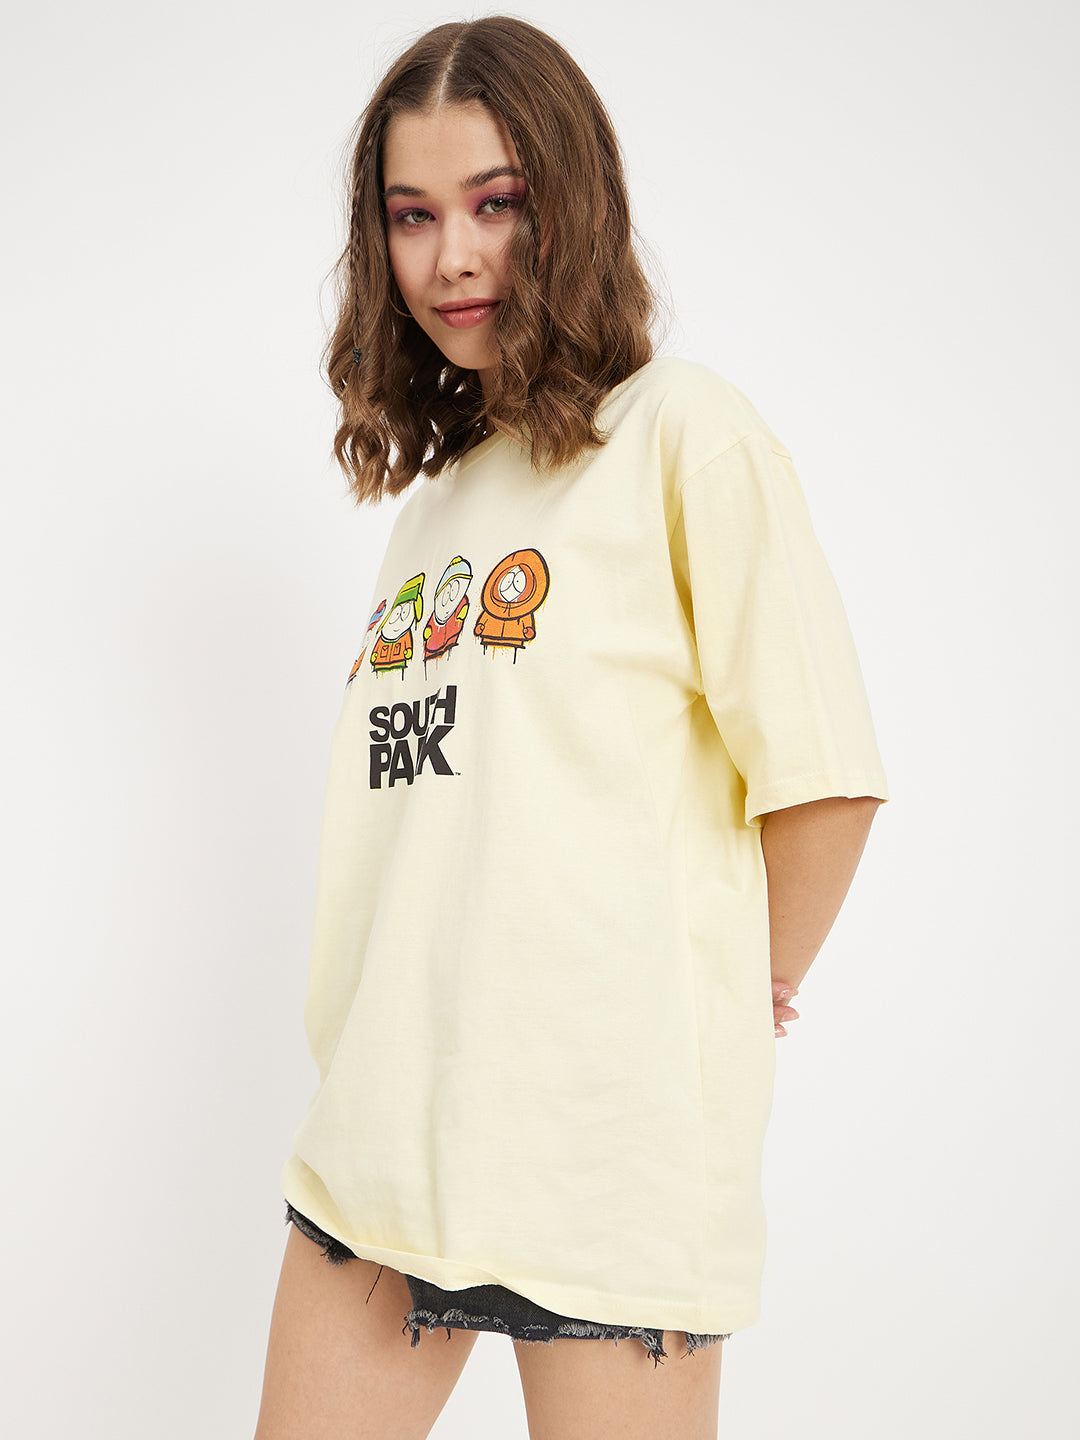 South Park: Oversized Tee